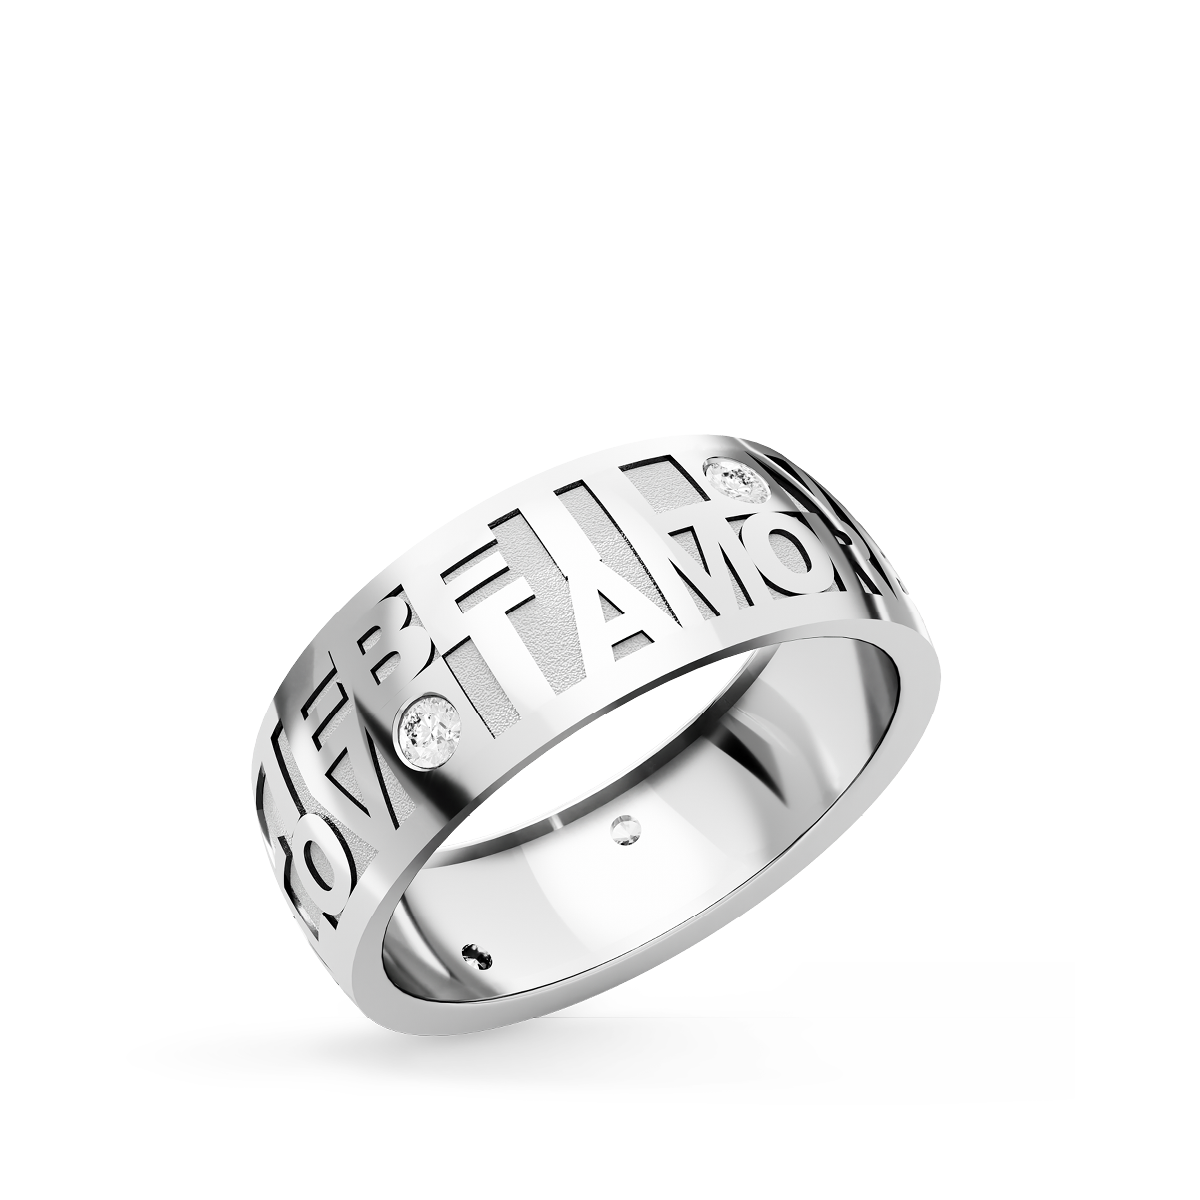 REQUEST A MOCK UP - Character Ring 7.0 Even Rings Luis & Freya   